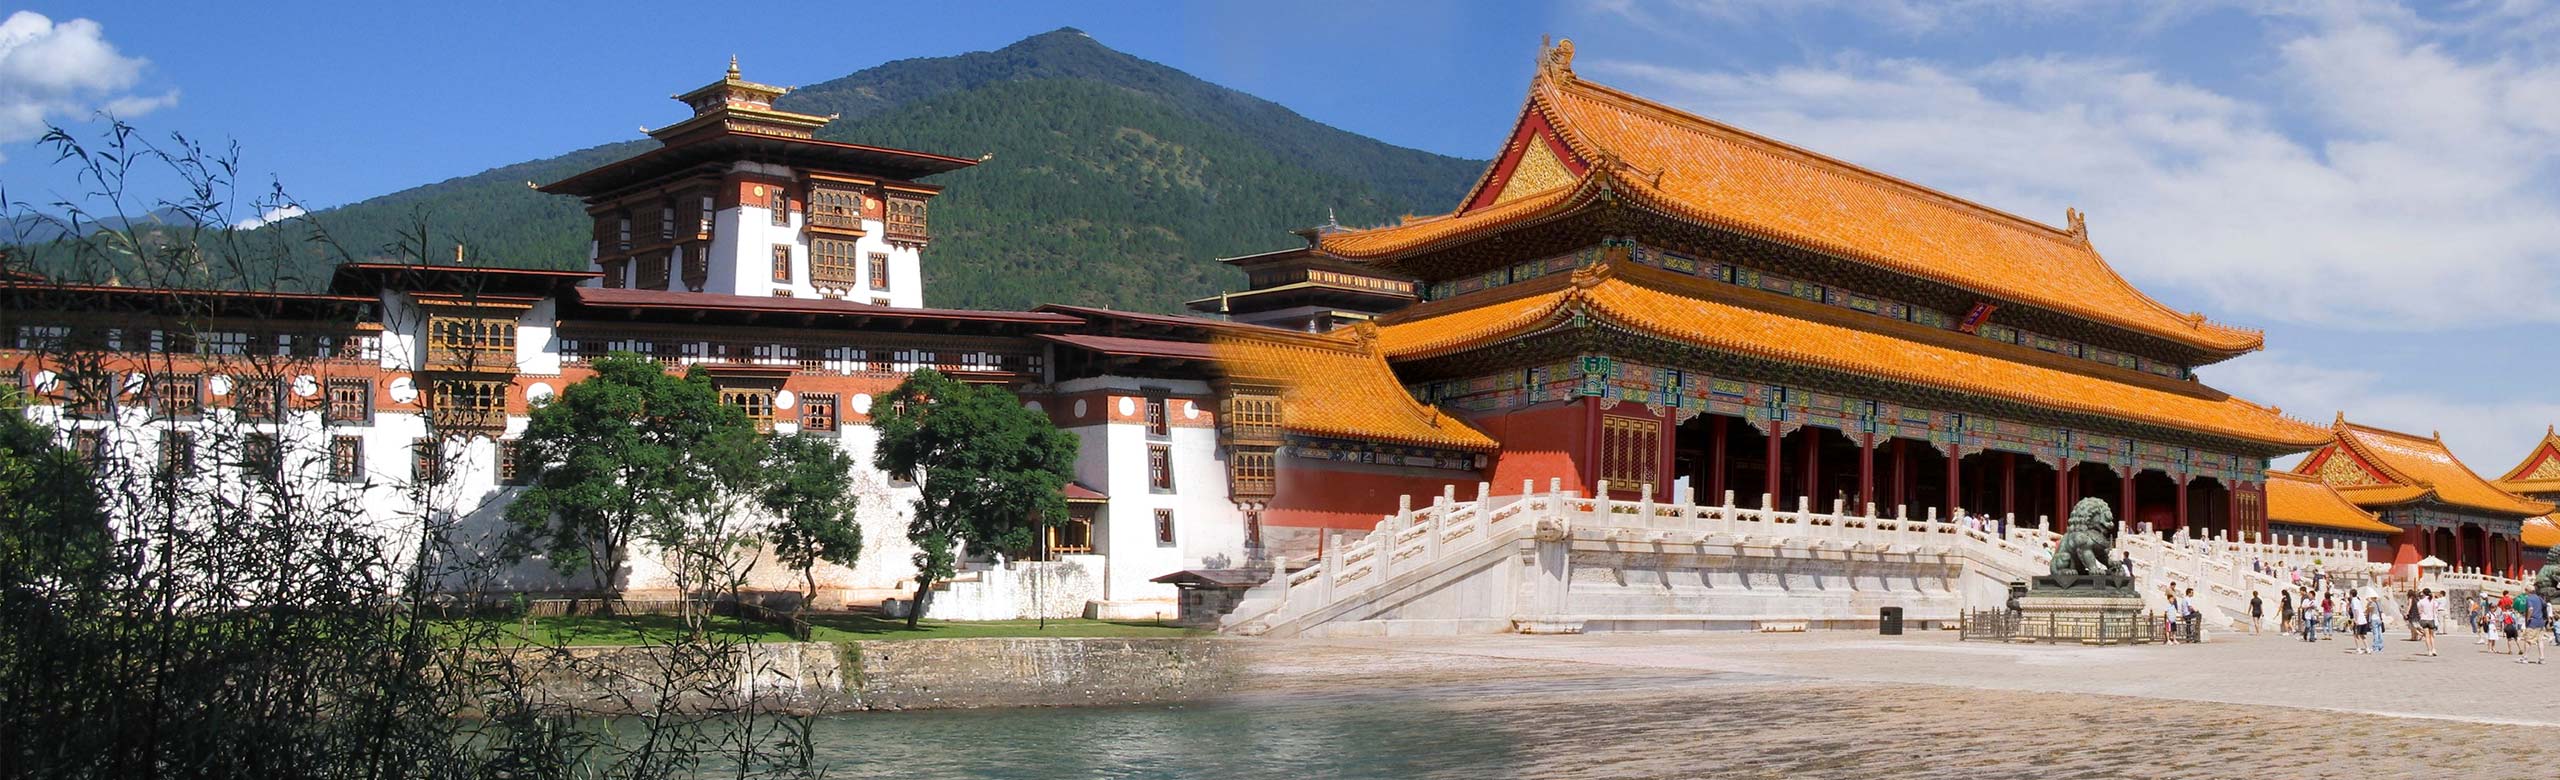 How to Get to Bhutan from Hong Kong and the Mainland of China